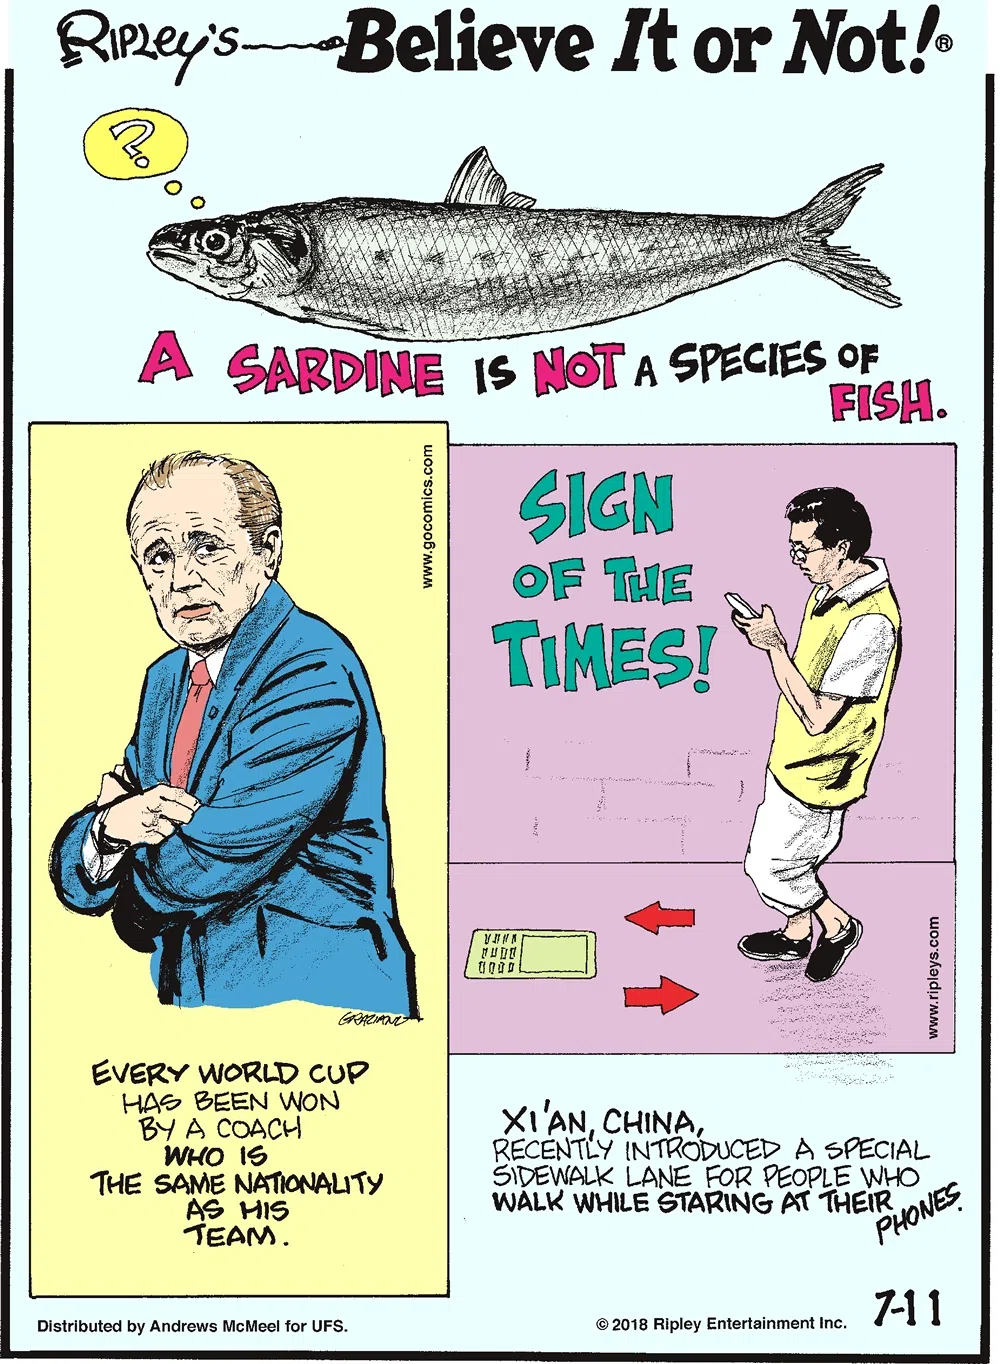 A sardine is not a species of fish.-------------------- Every World Cup has been won by a coach who is the same nationality as his team.-------------------- Xi'an, China, recently introduced a special sidewalk lane for people who walk while staring at their phones.